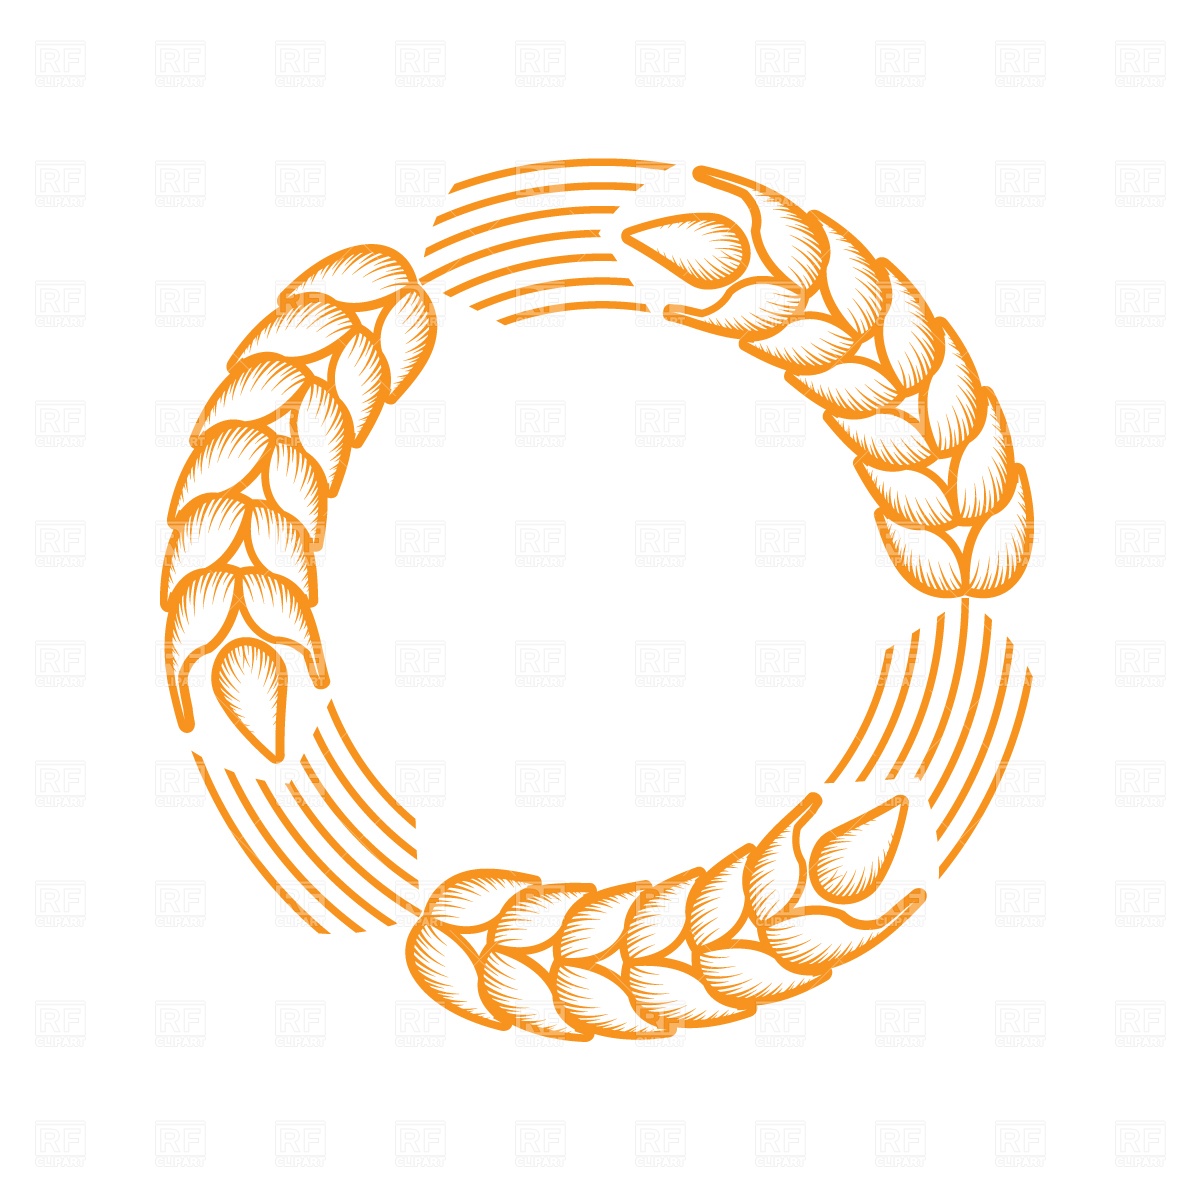 Wheat Ear Round Frame Download Royalty Free Vector Clipart  Eps